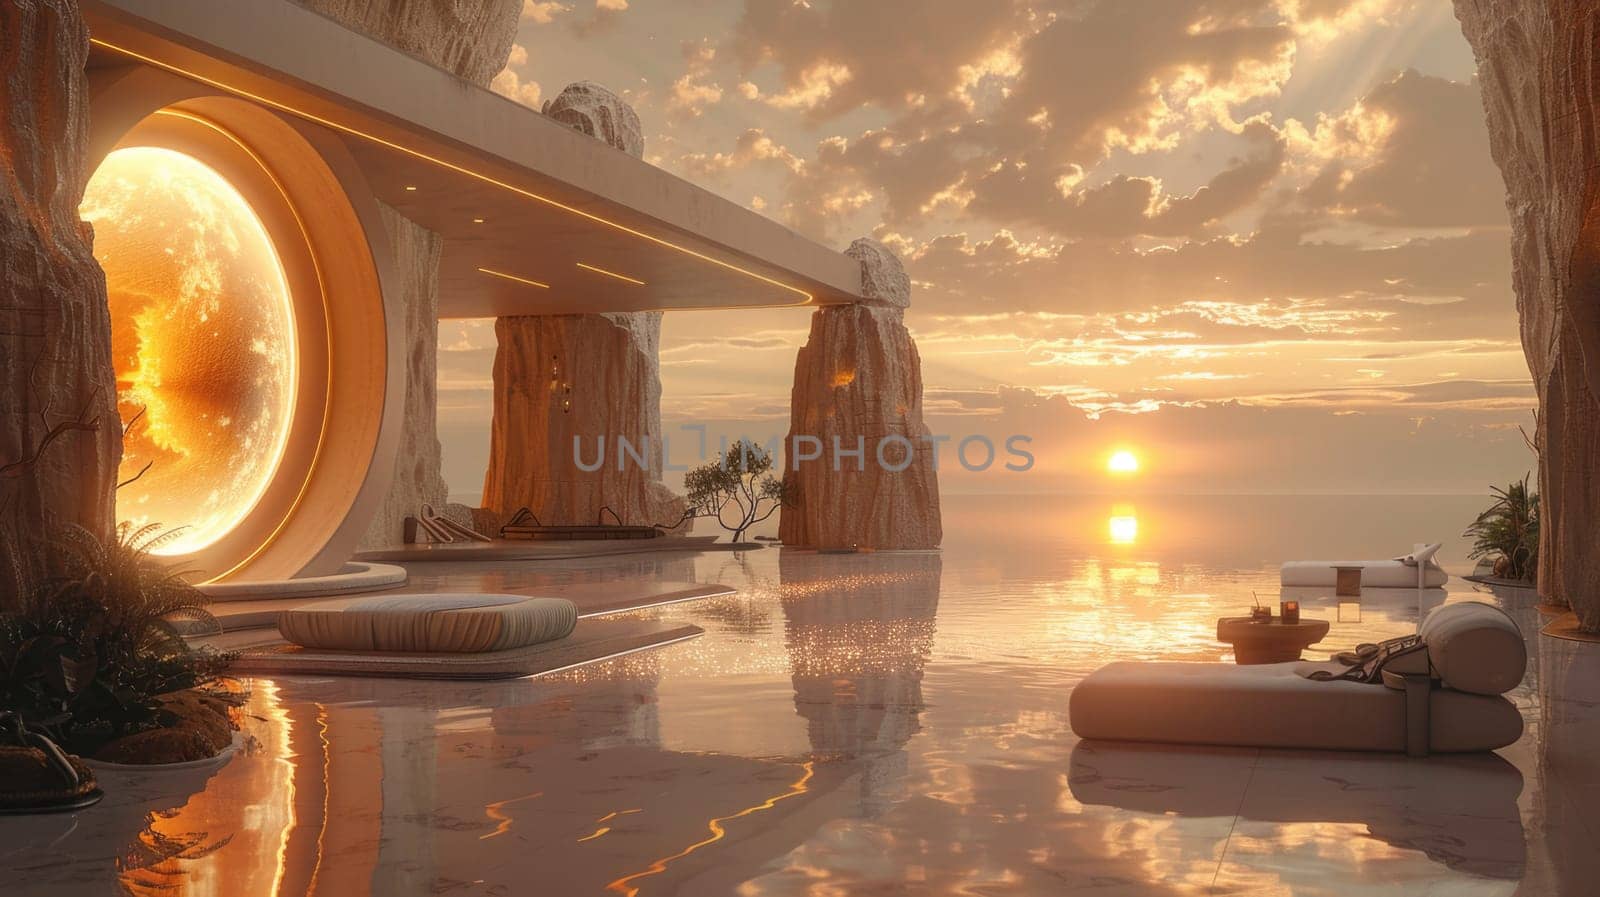 Virtual reality glasses displaying a room overlooking the ocean during sunset.